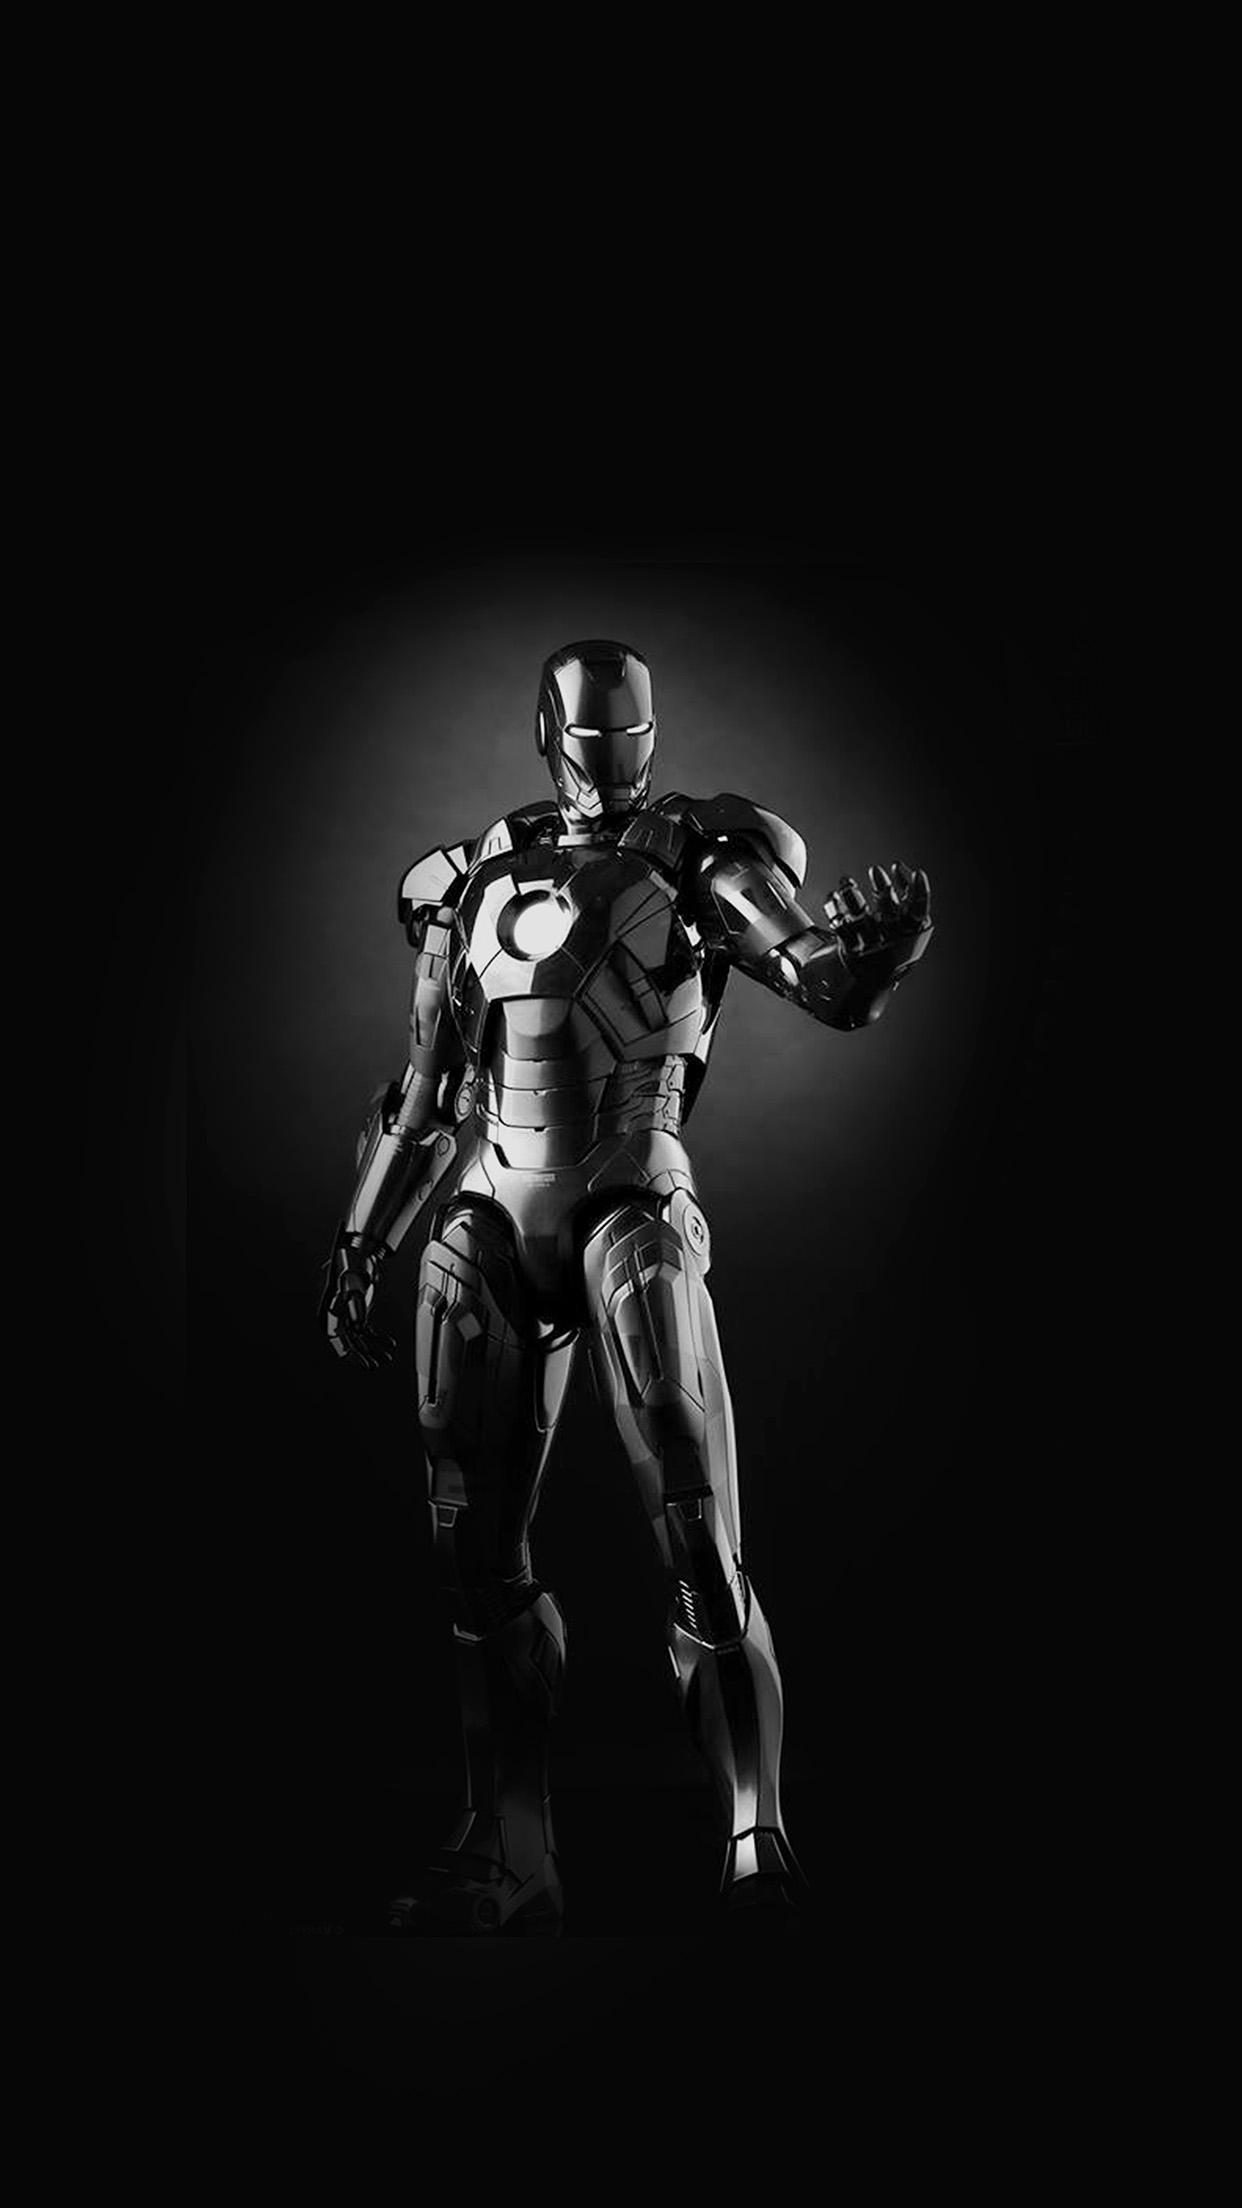 Cool Picture of Iron Man Photo with Dark Background